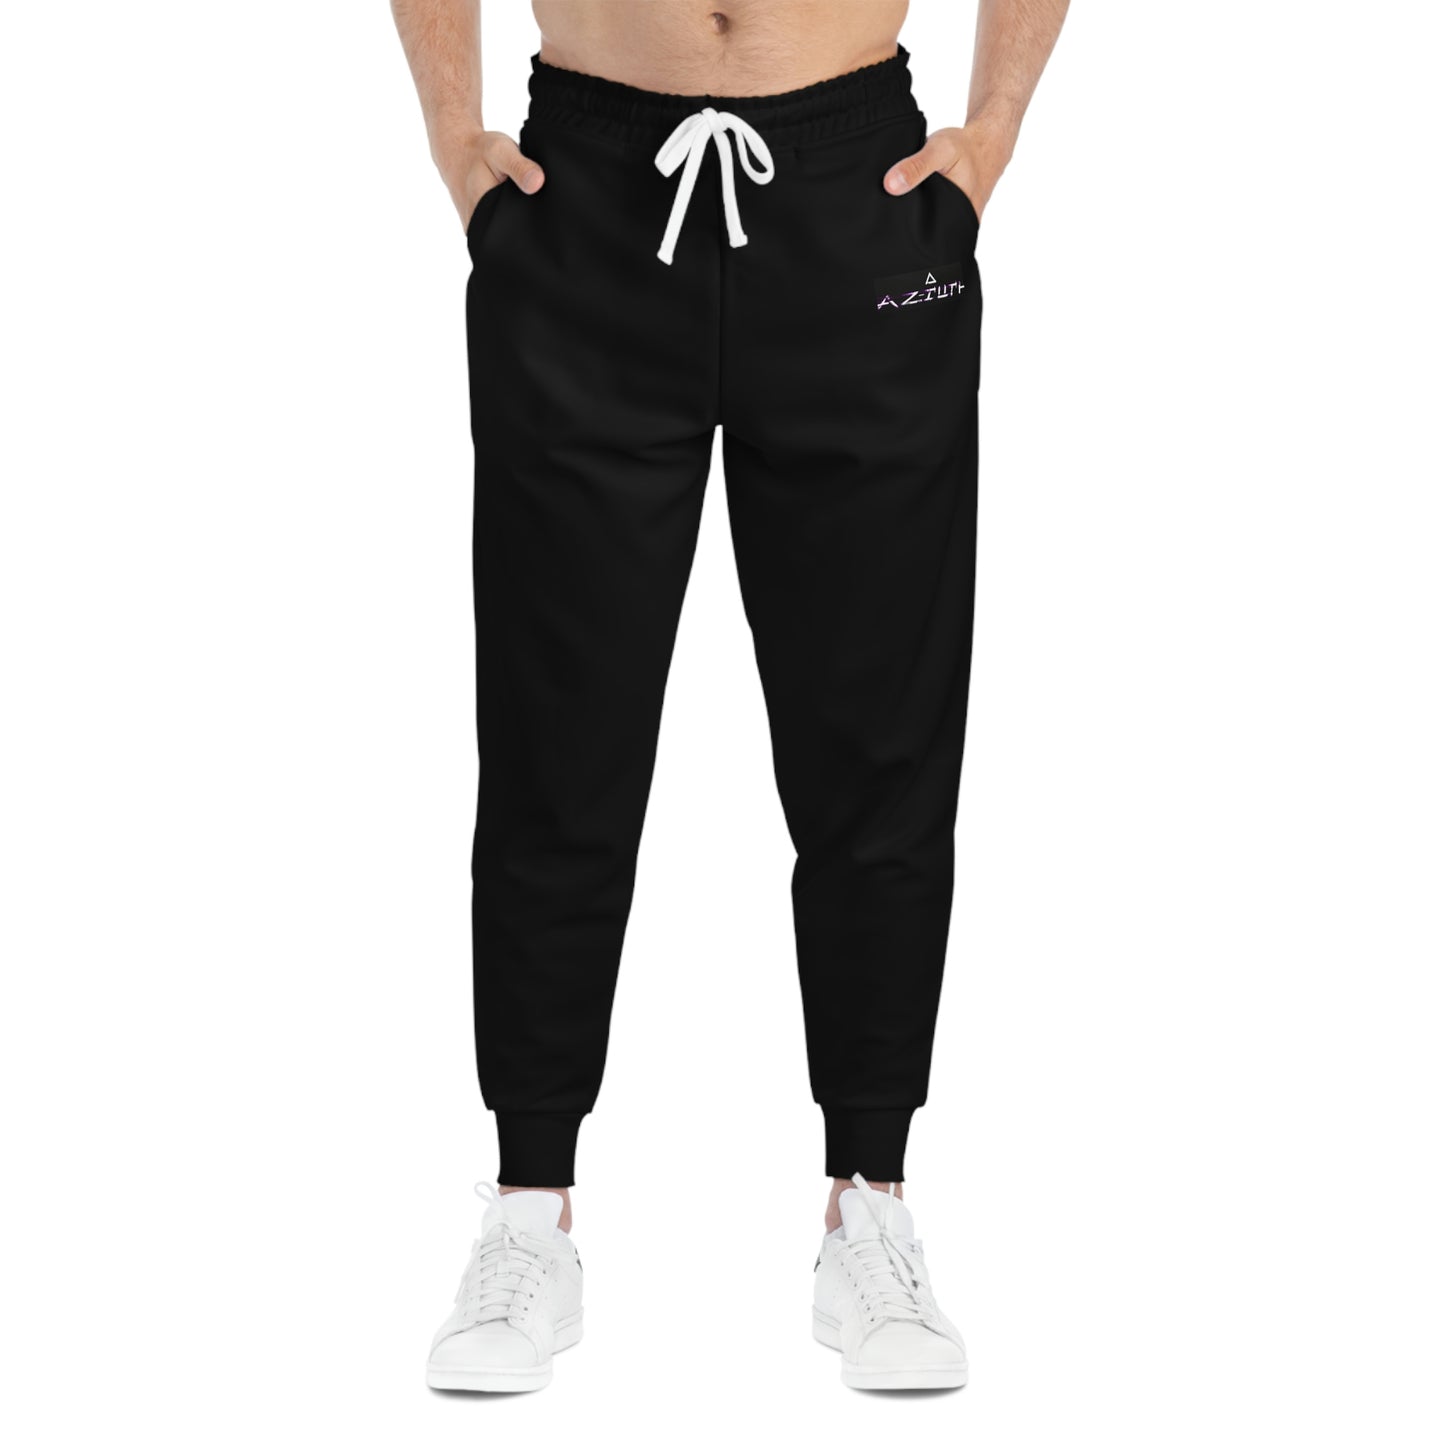 Atziluth Gallery Unisex Joggers- All Black